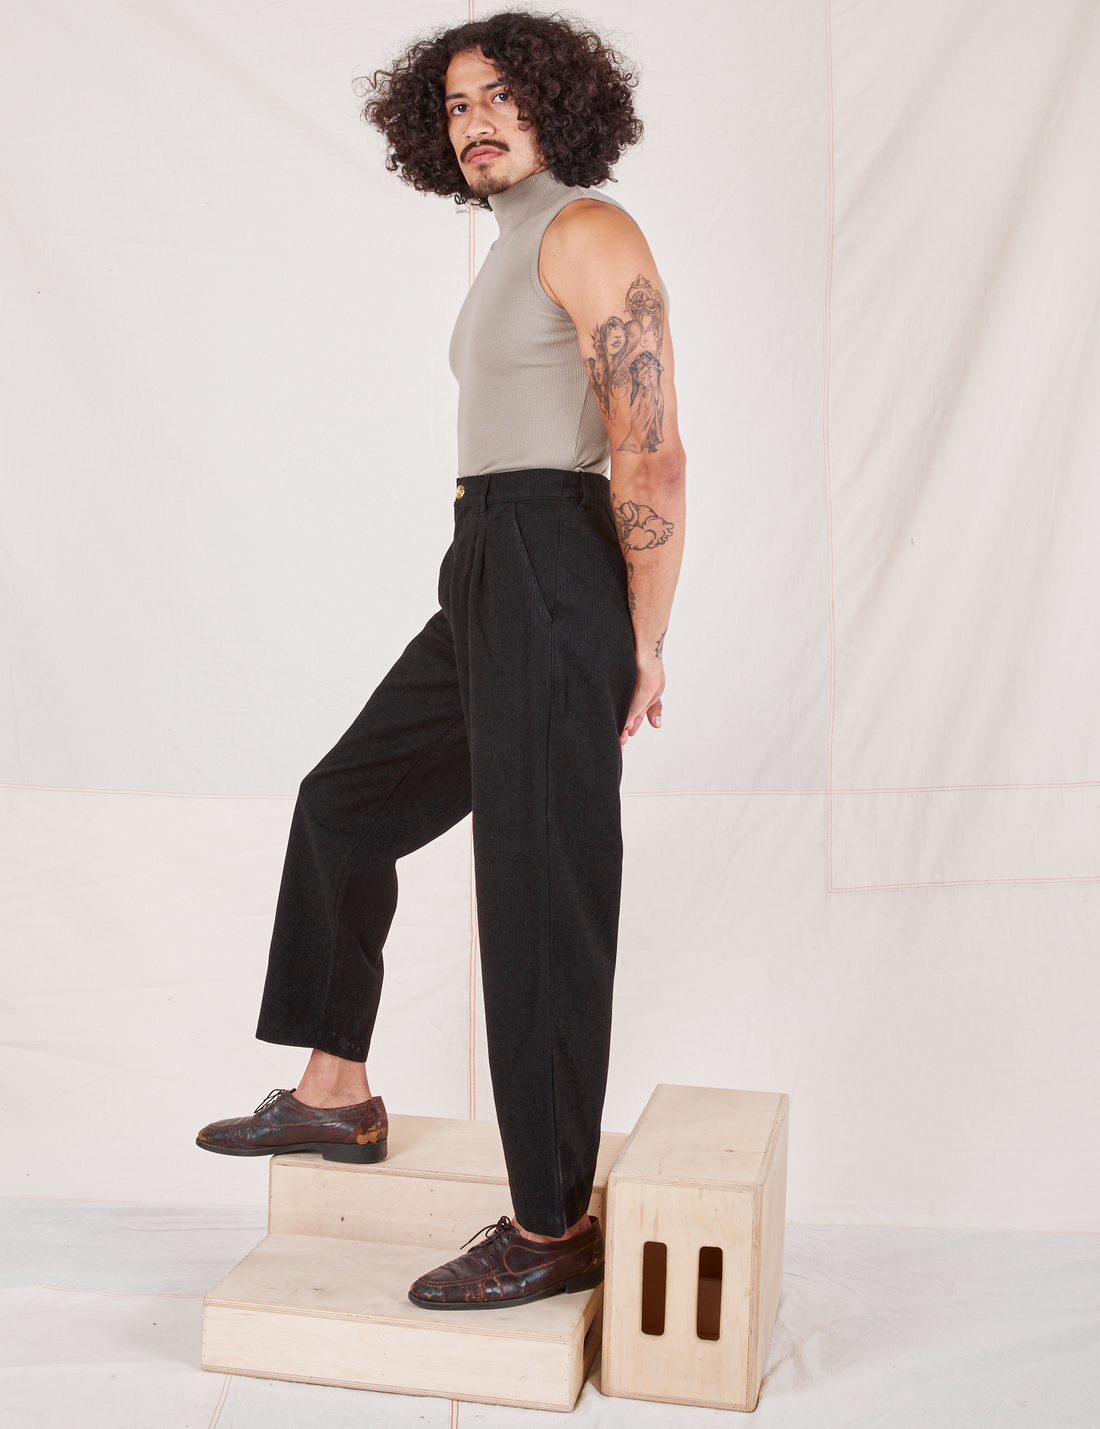 Side view of Heritage Trousers in Basic Black and khaki grey Sleeveless Turtleneck worn by Jesse